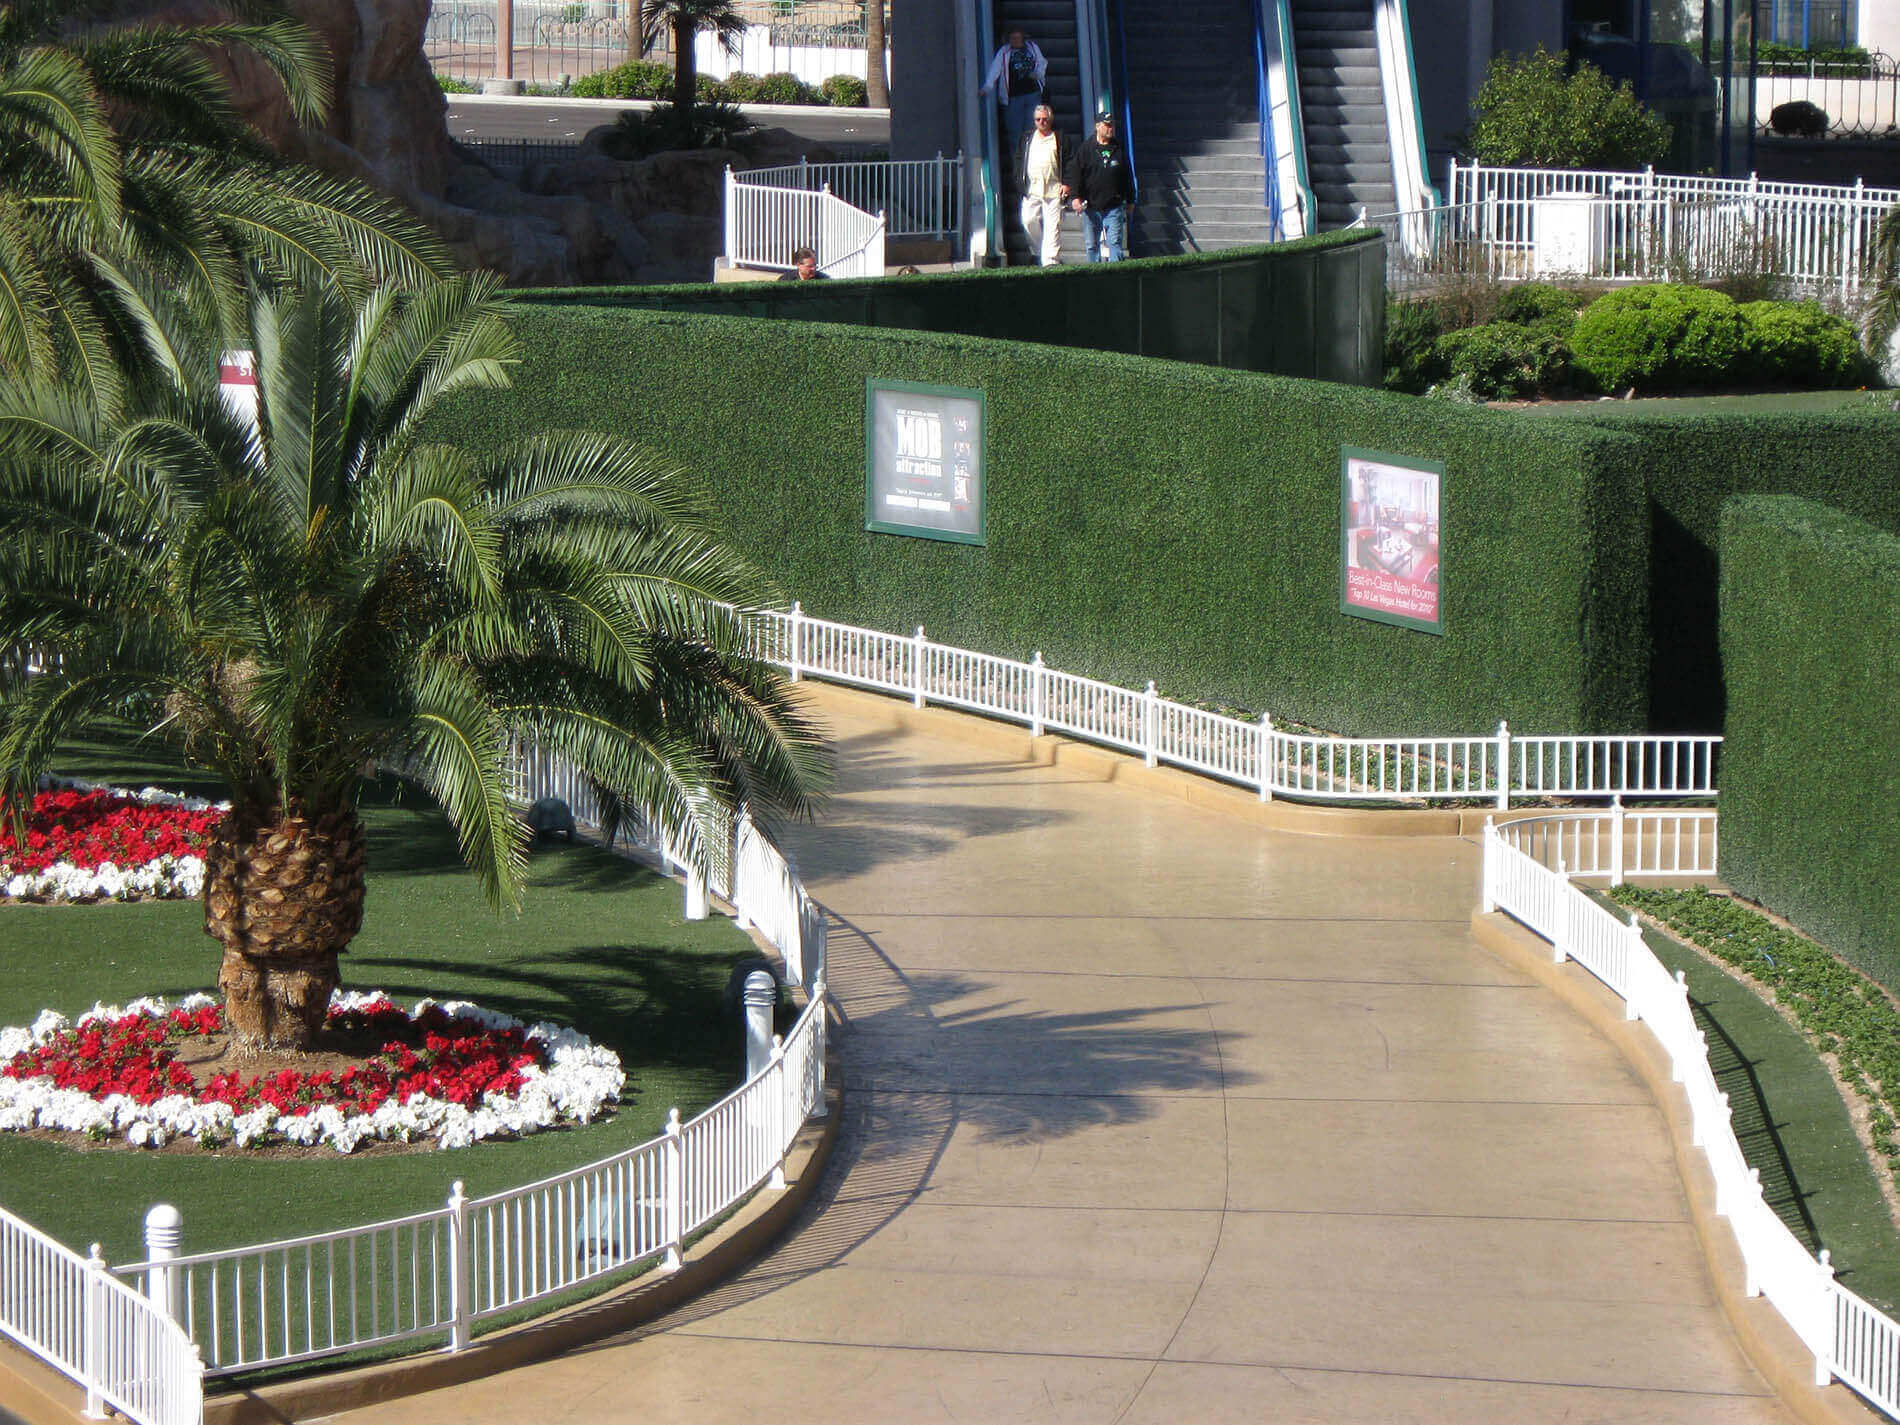 Hedges and palm trees at the tropicana